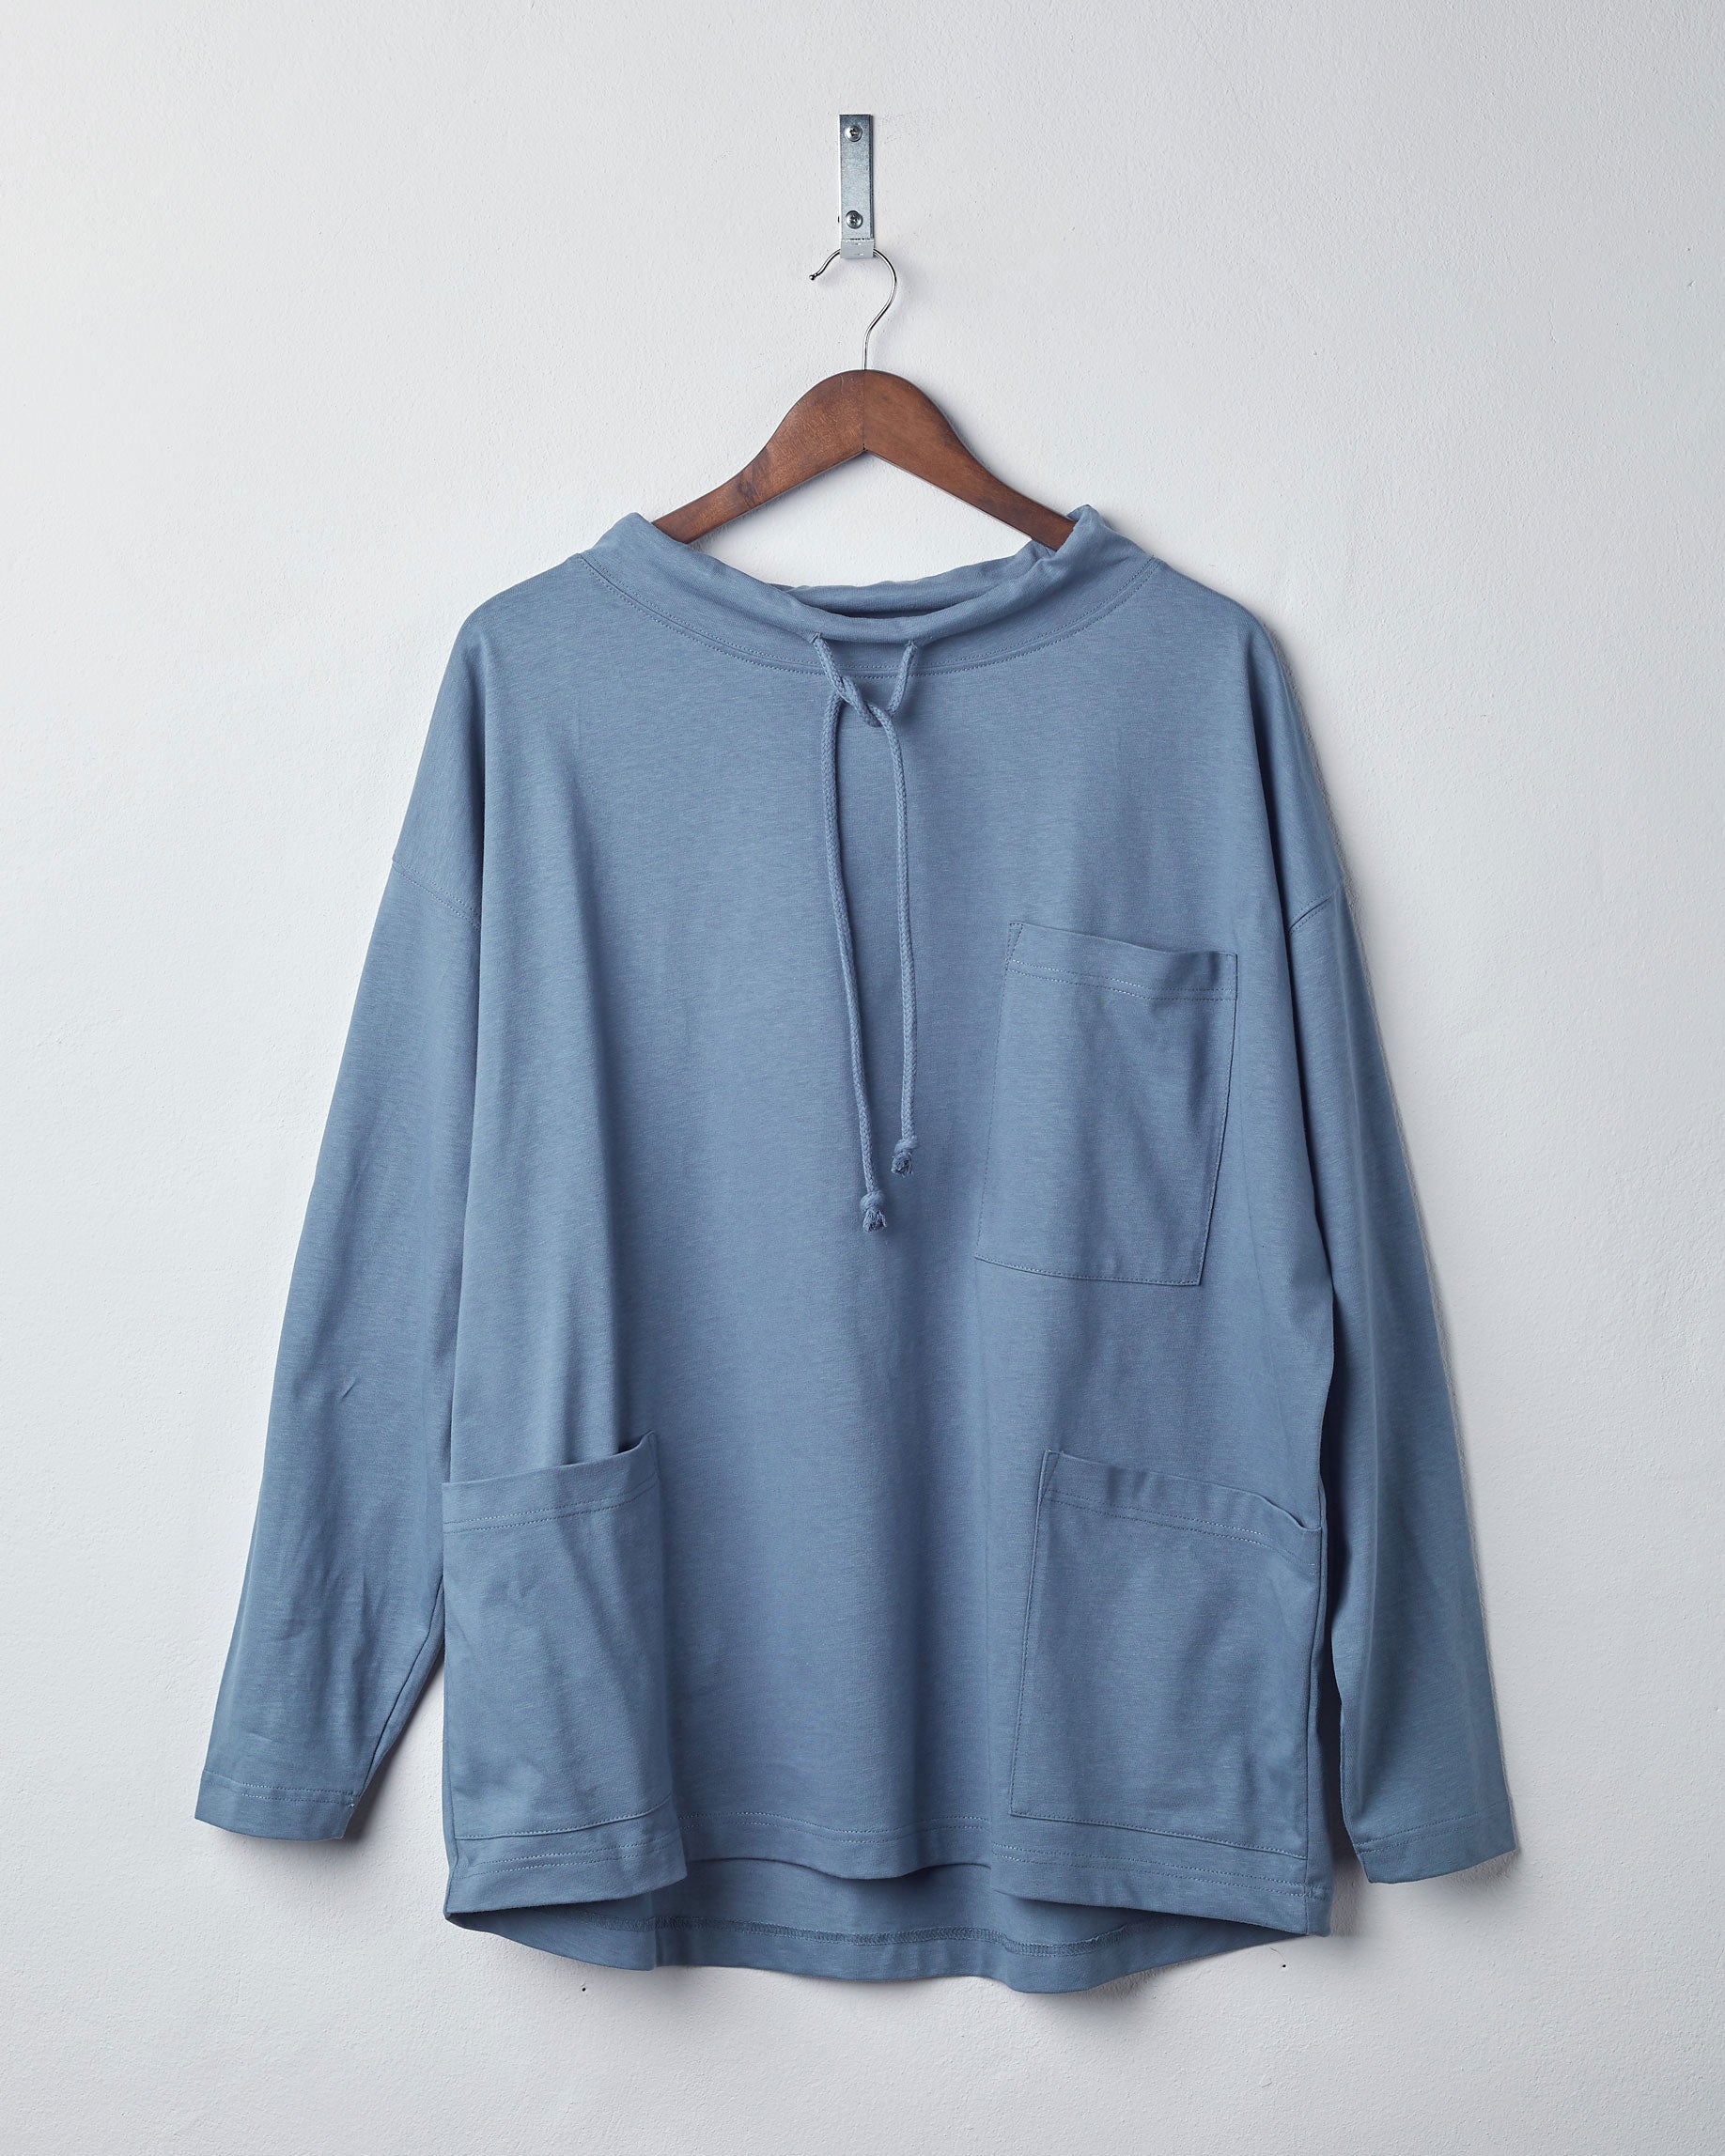 Front view of teal organic cotton #3032 jersey tie neck smock by Uskees, presented on hanger against white background. 